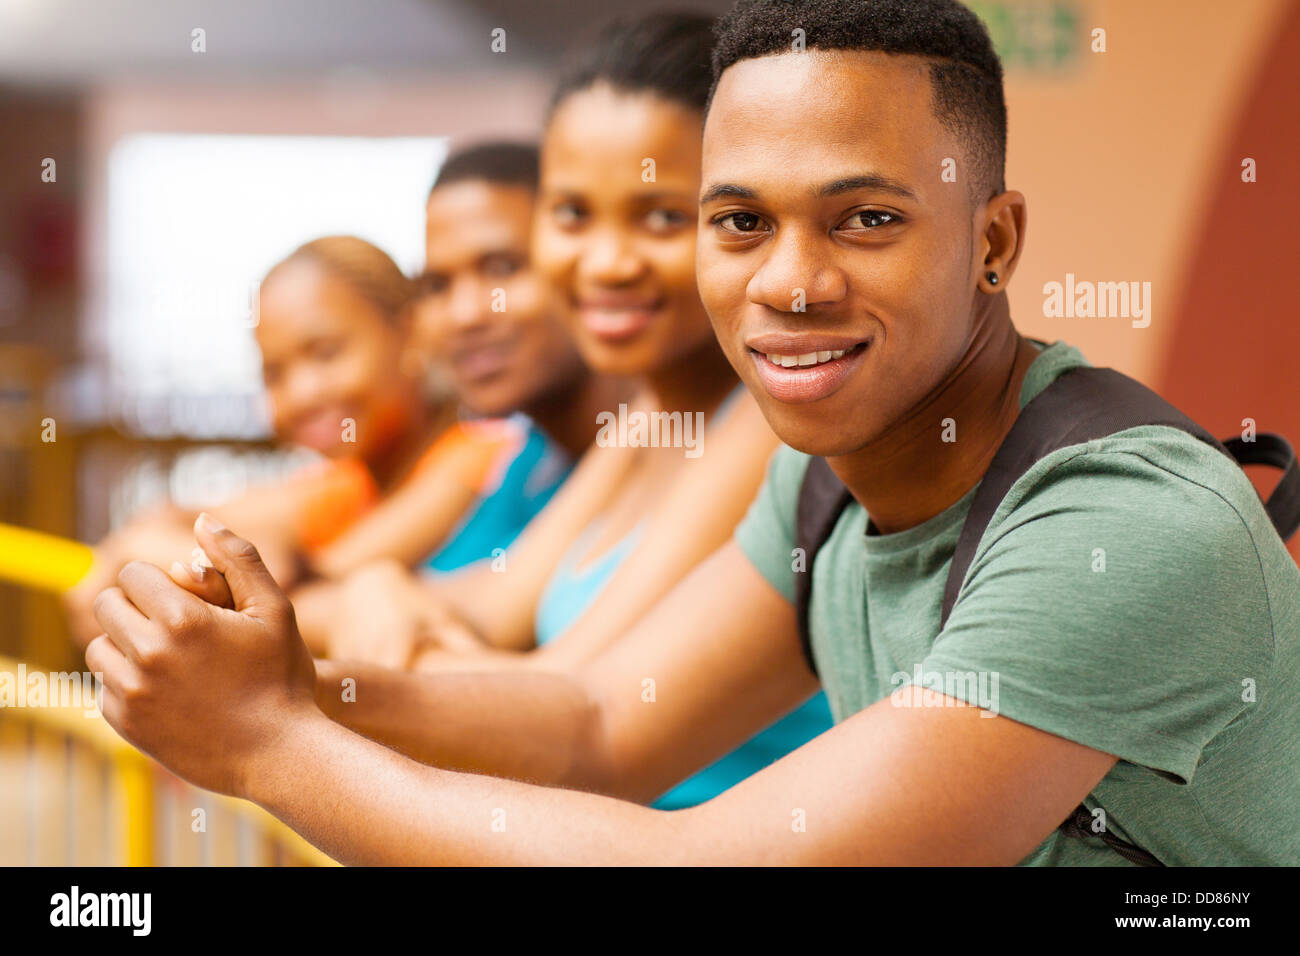 handsome young African college boy with group of friends Stock Photo